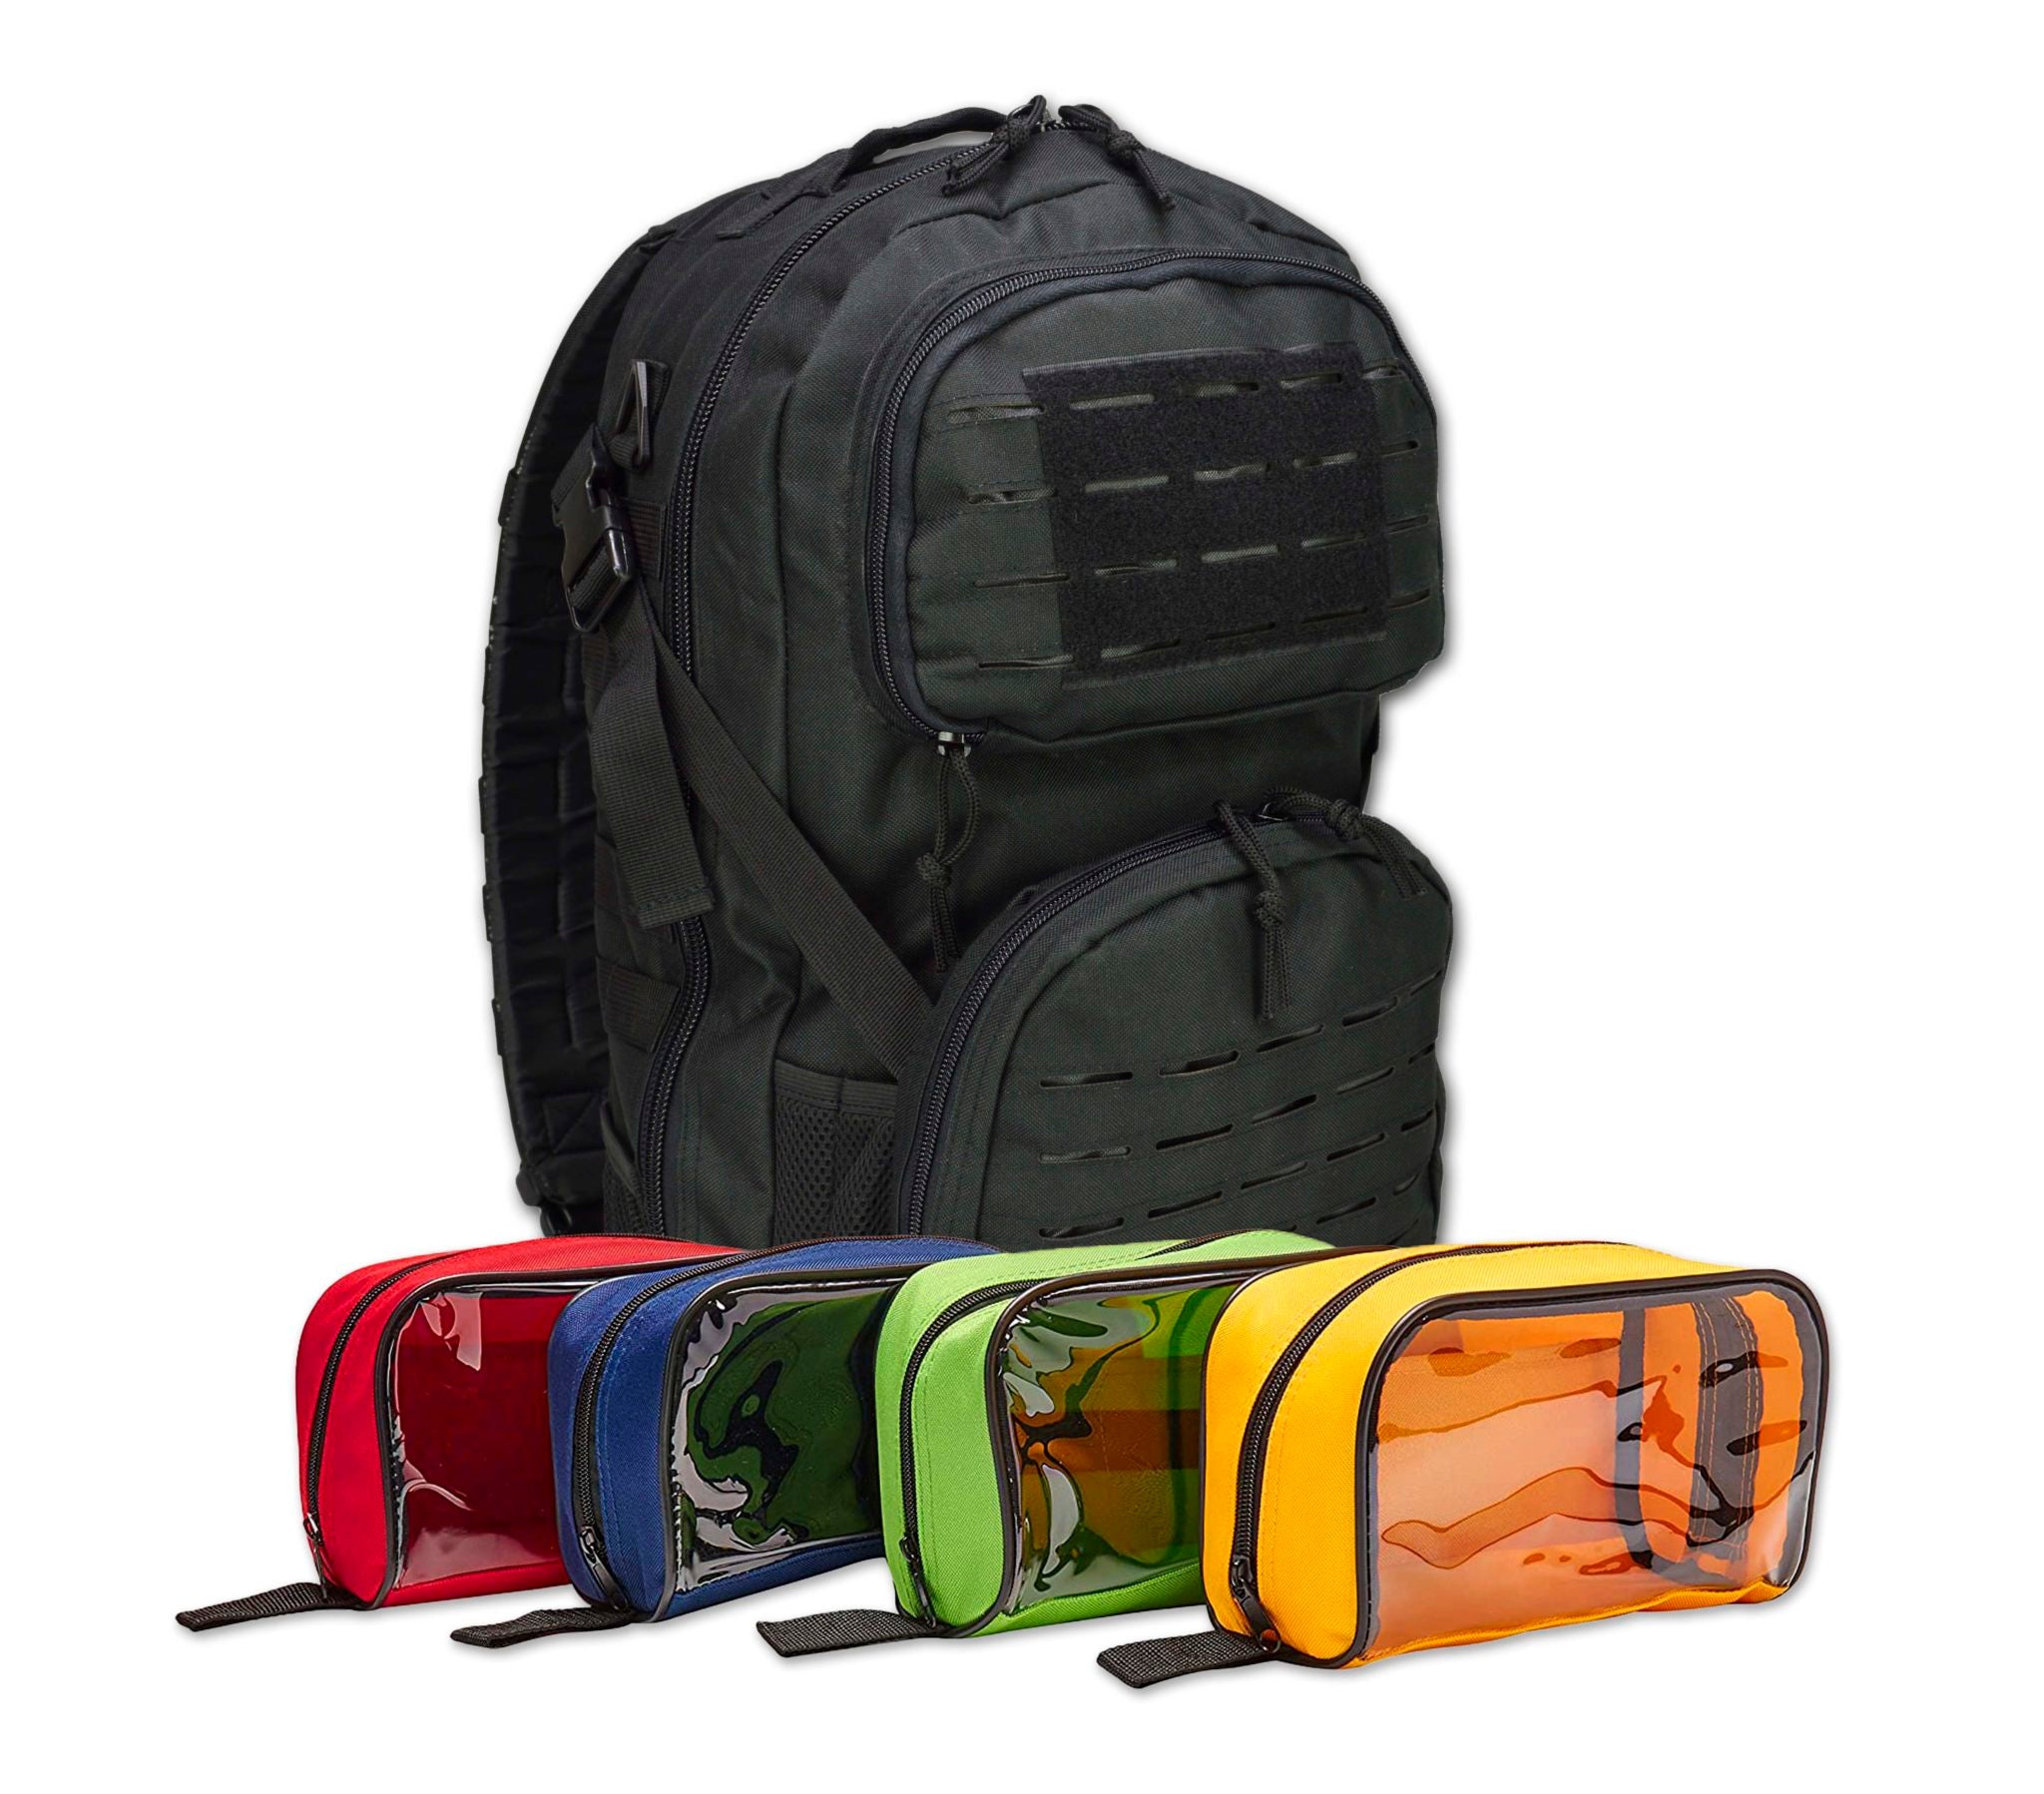 Premium tactical backpack w/ modular pouches & hydration port